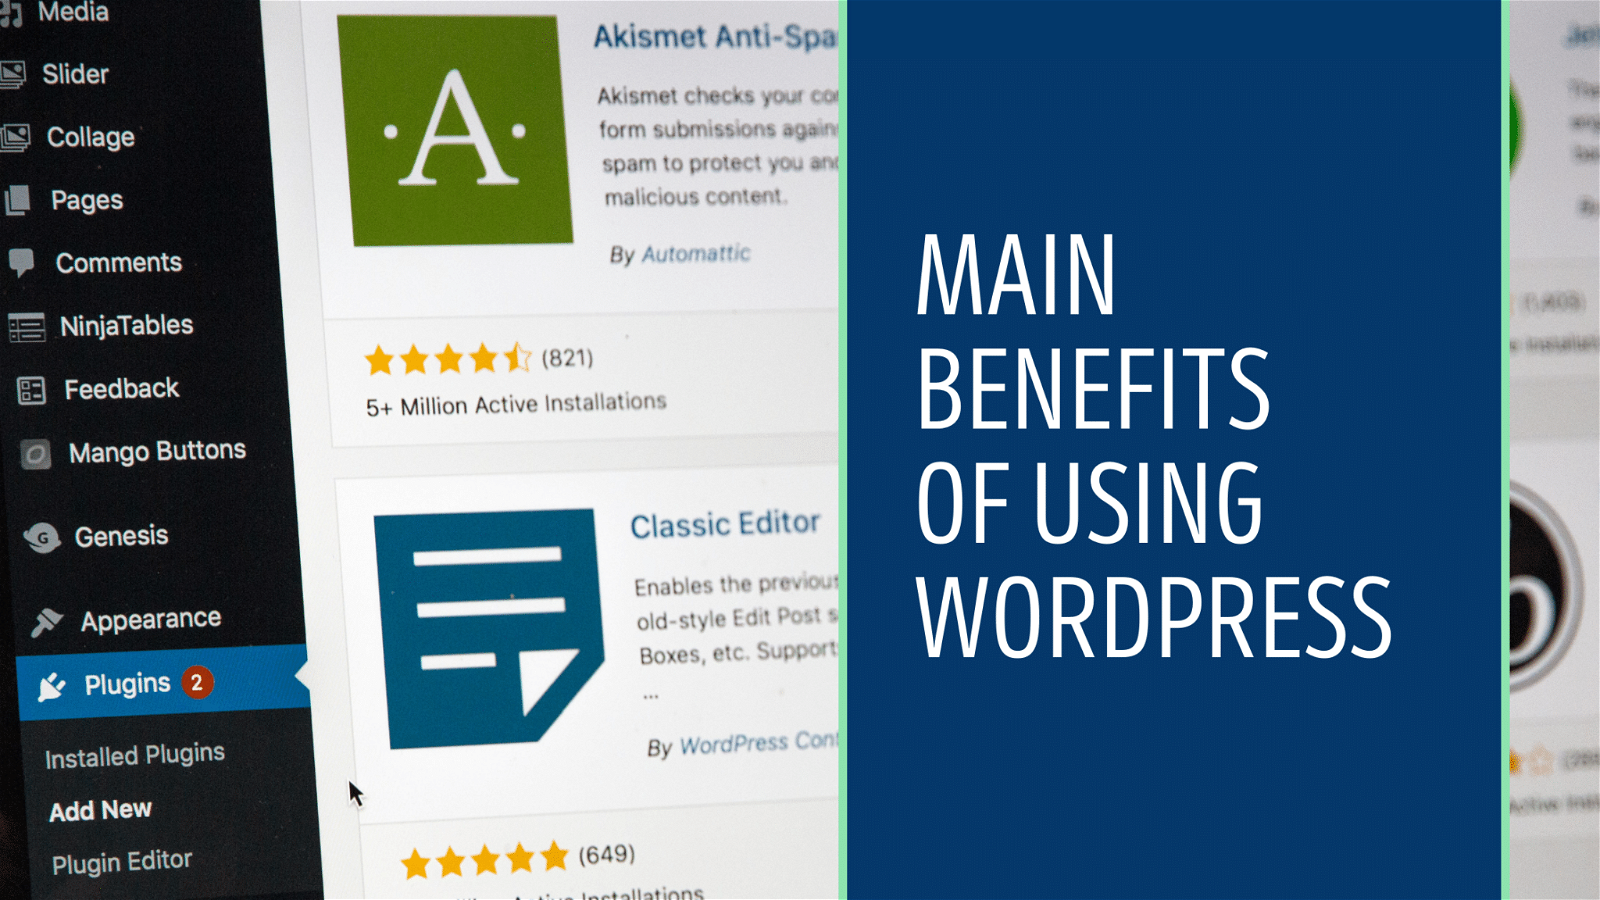 Akismet is a plugin for WordPress that checks form submissions against spam to protect users from malicious content.